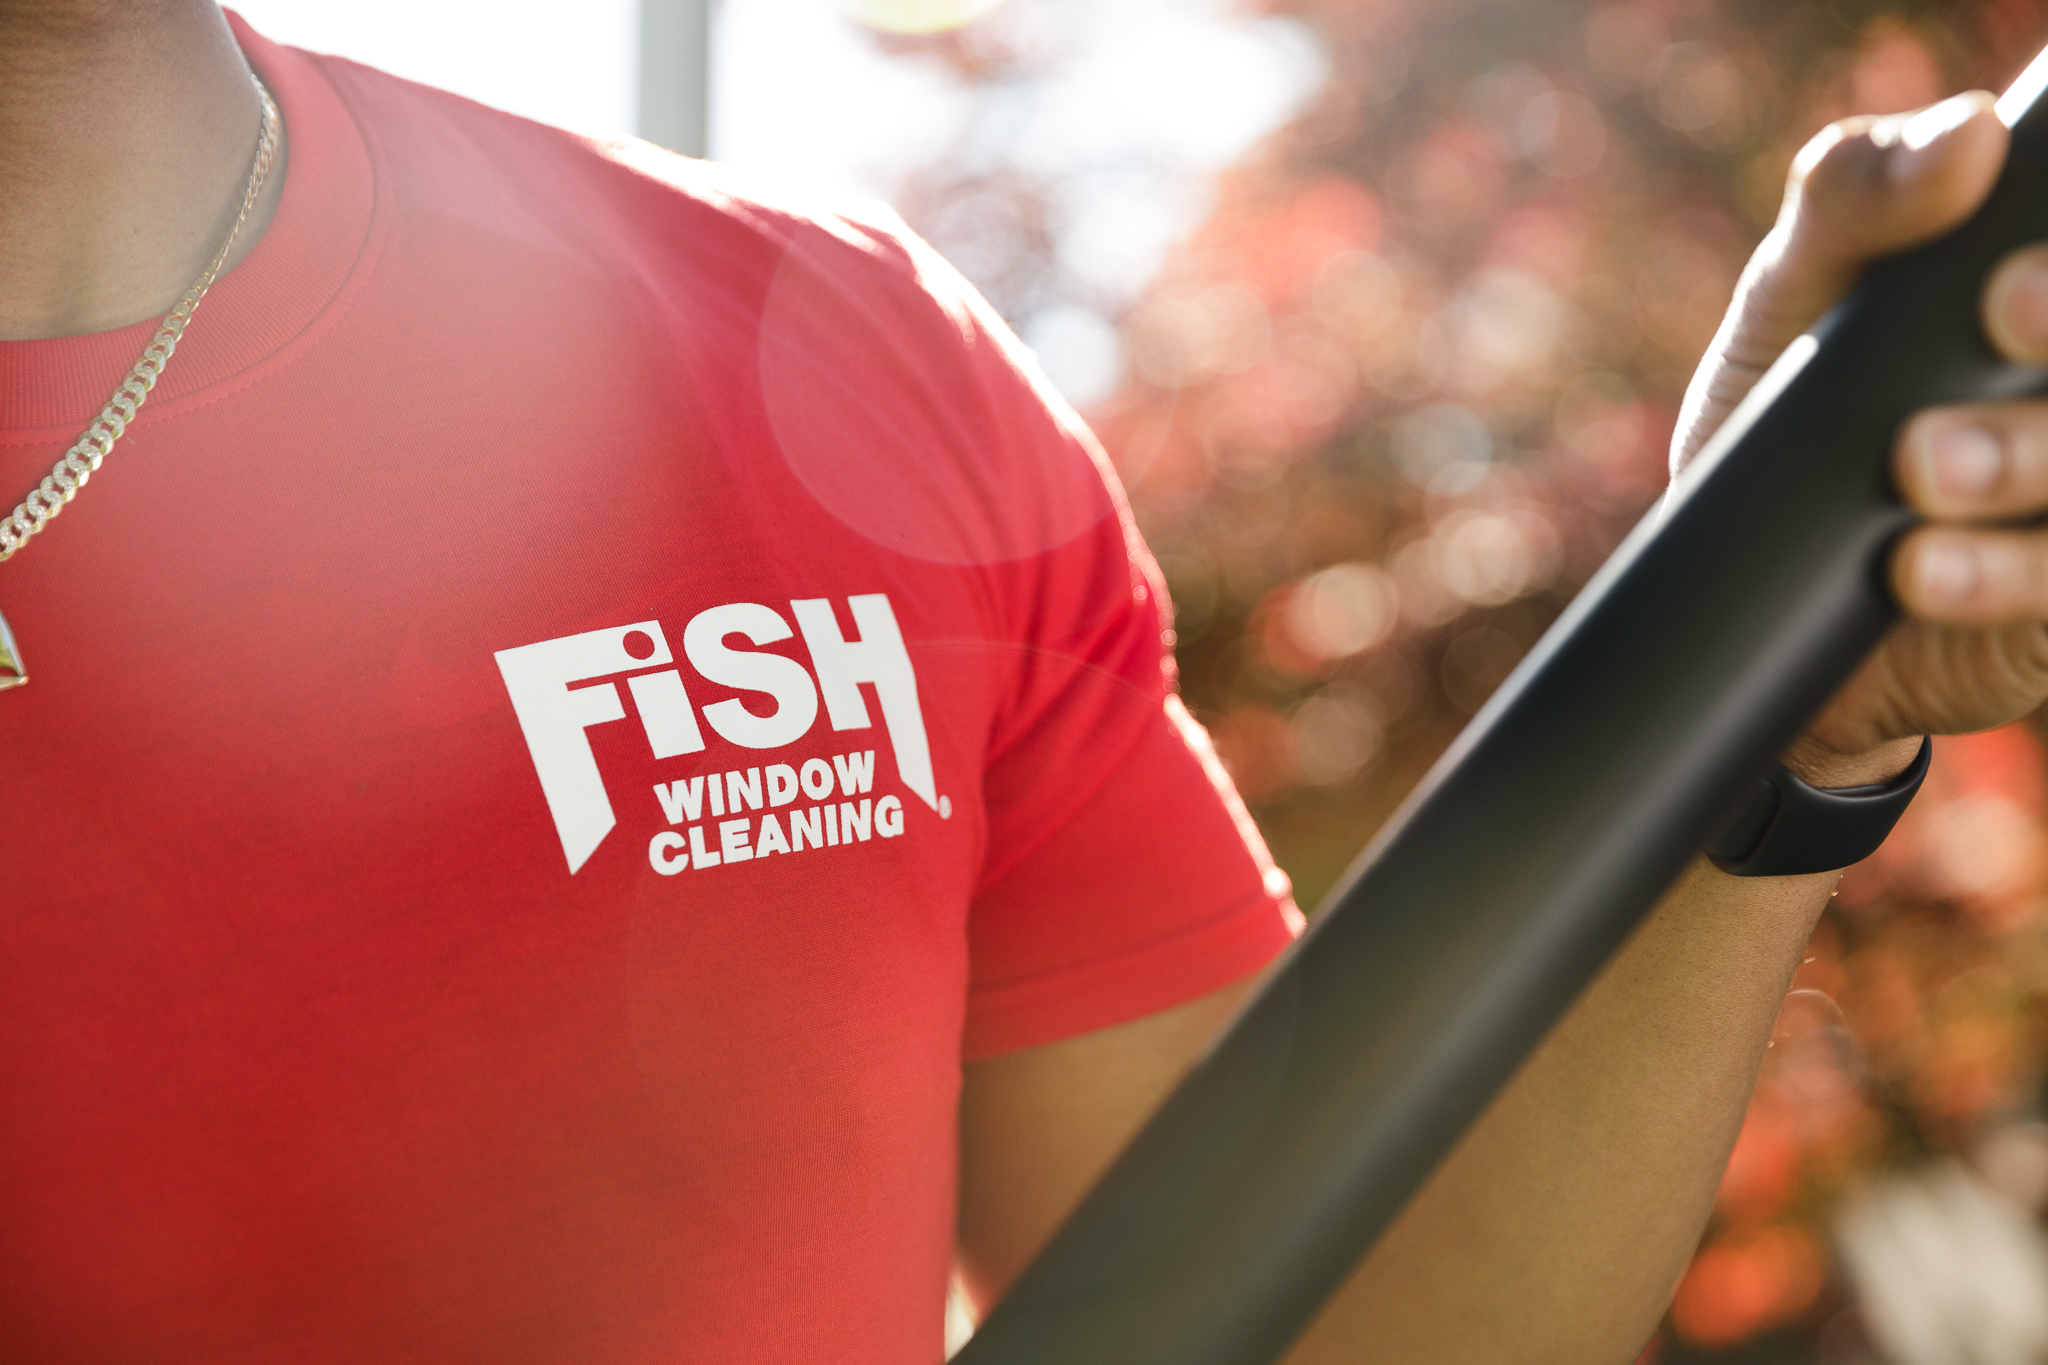 Fish Window Cleaning Logo on Chest of Shirt